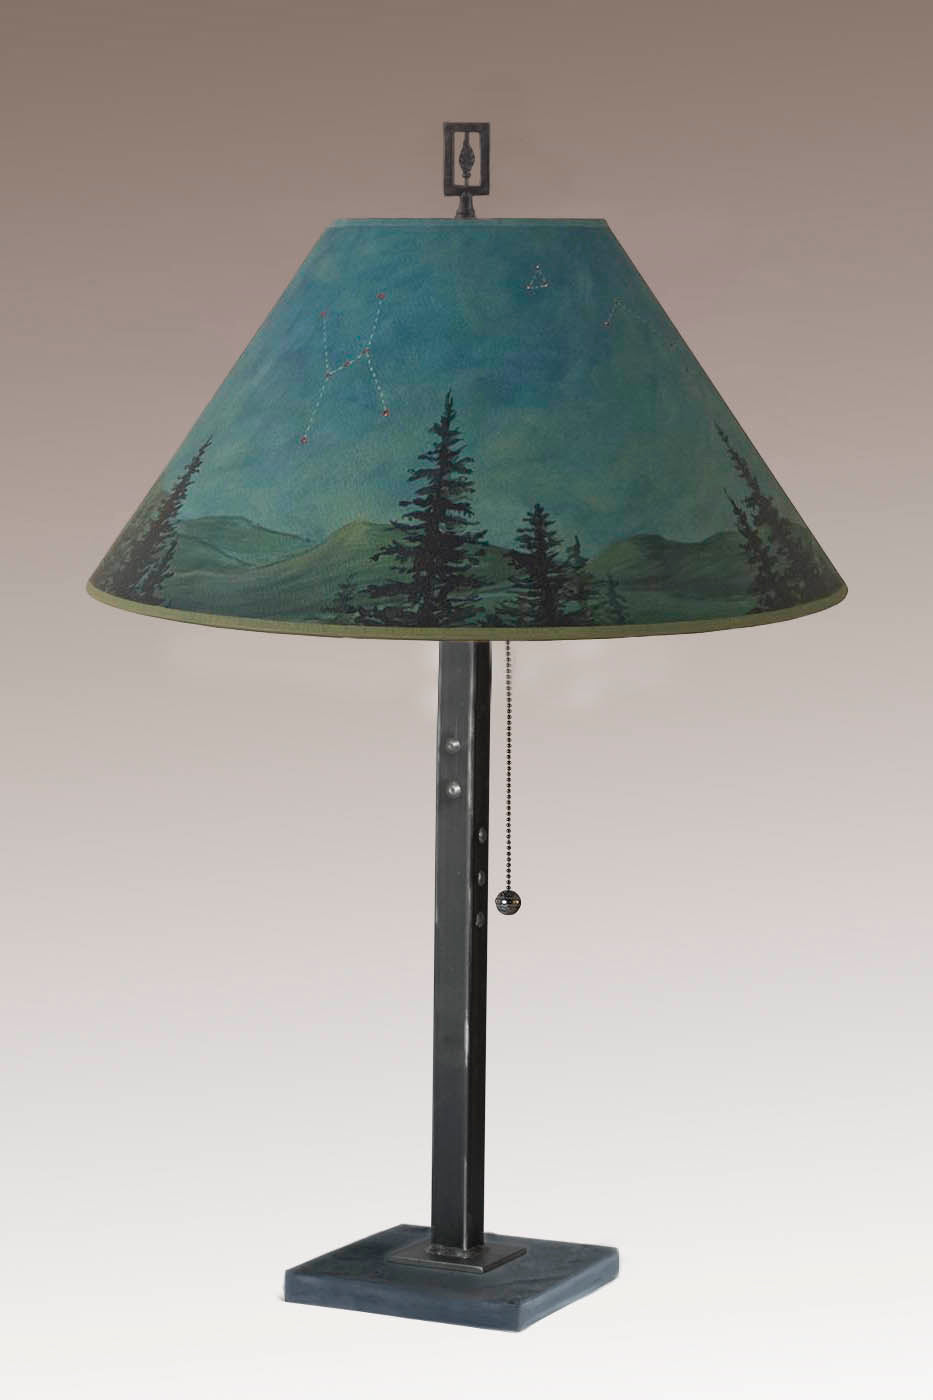 Janna Ugone & Co Table Lamp Steel Table Lamp with Large Conical Shade in Midnight Sky